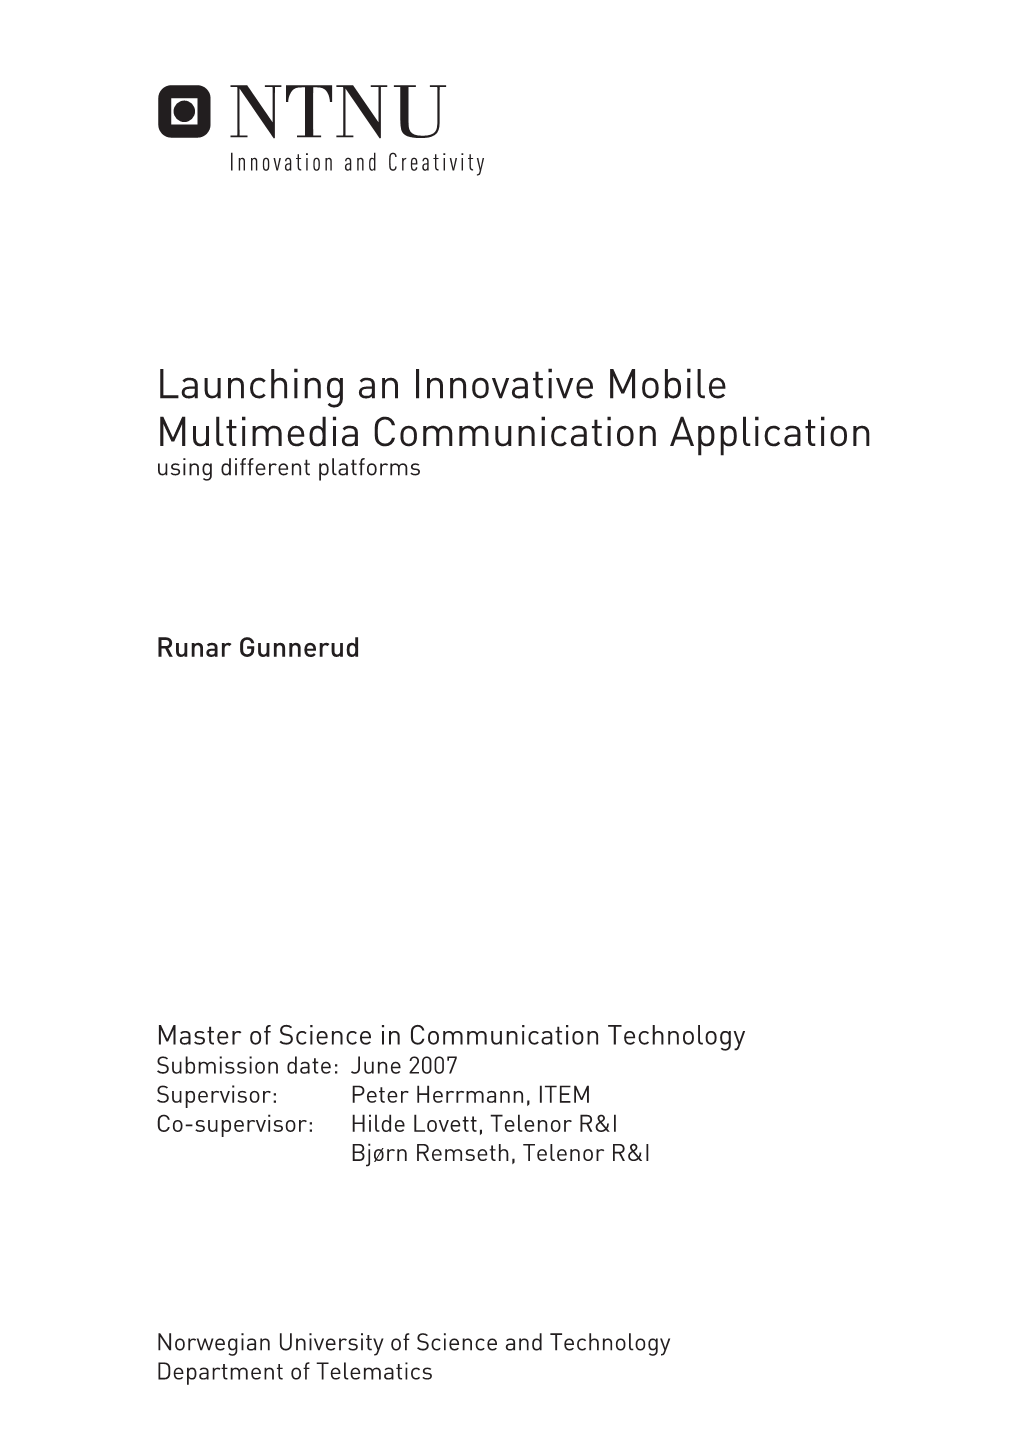 Launching an Innovative Mobile Multimedia Communication Application Using Different Platforms